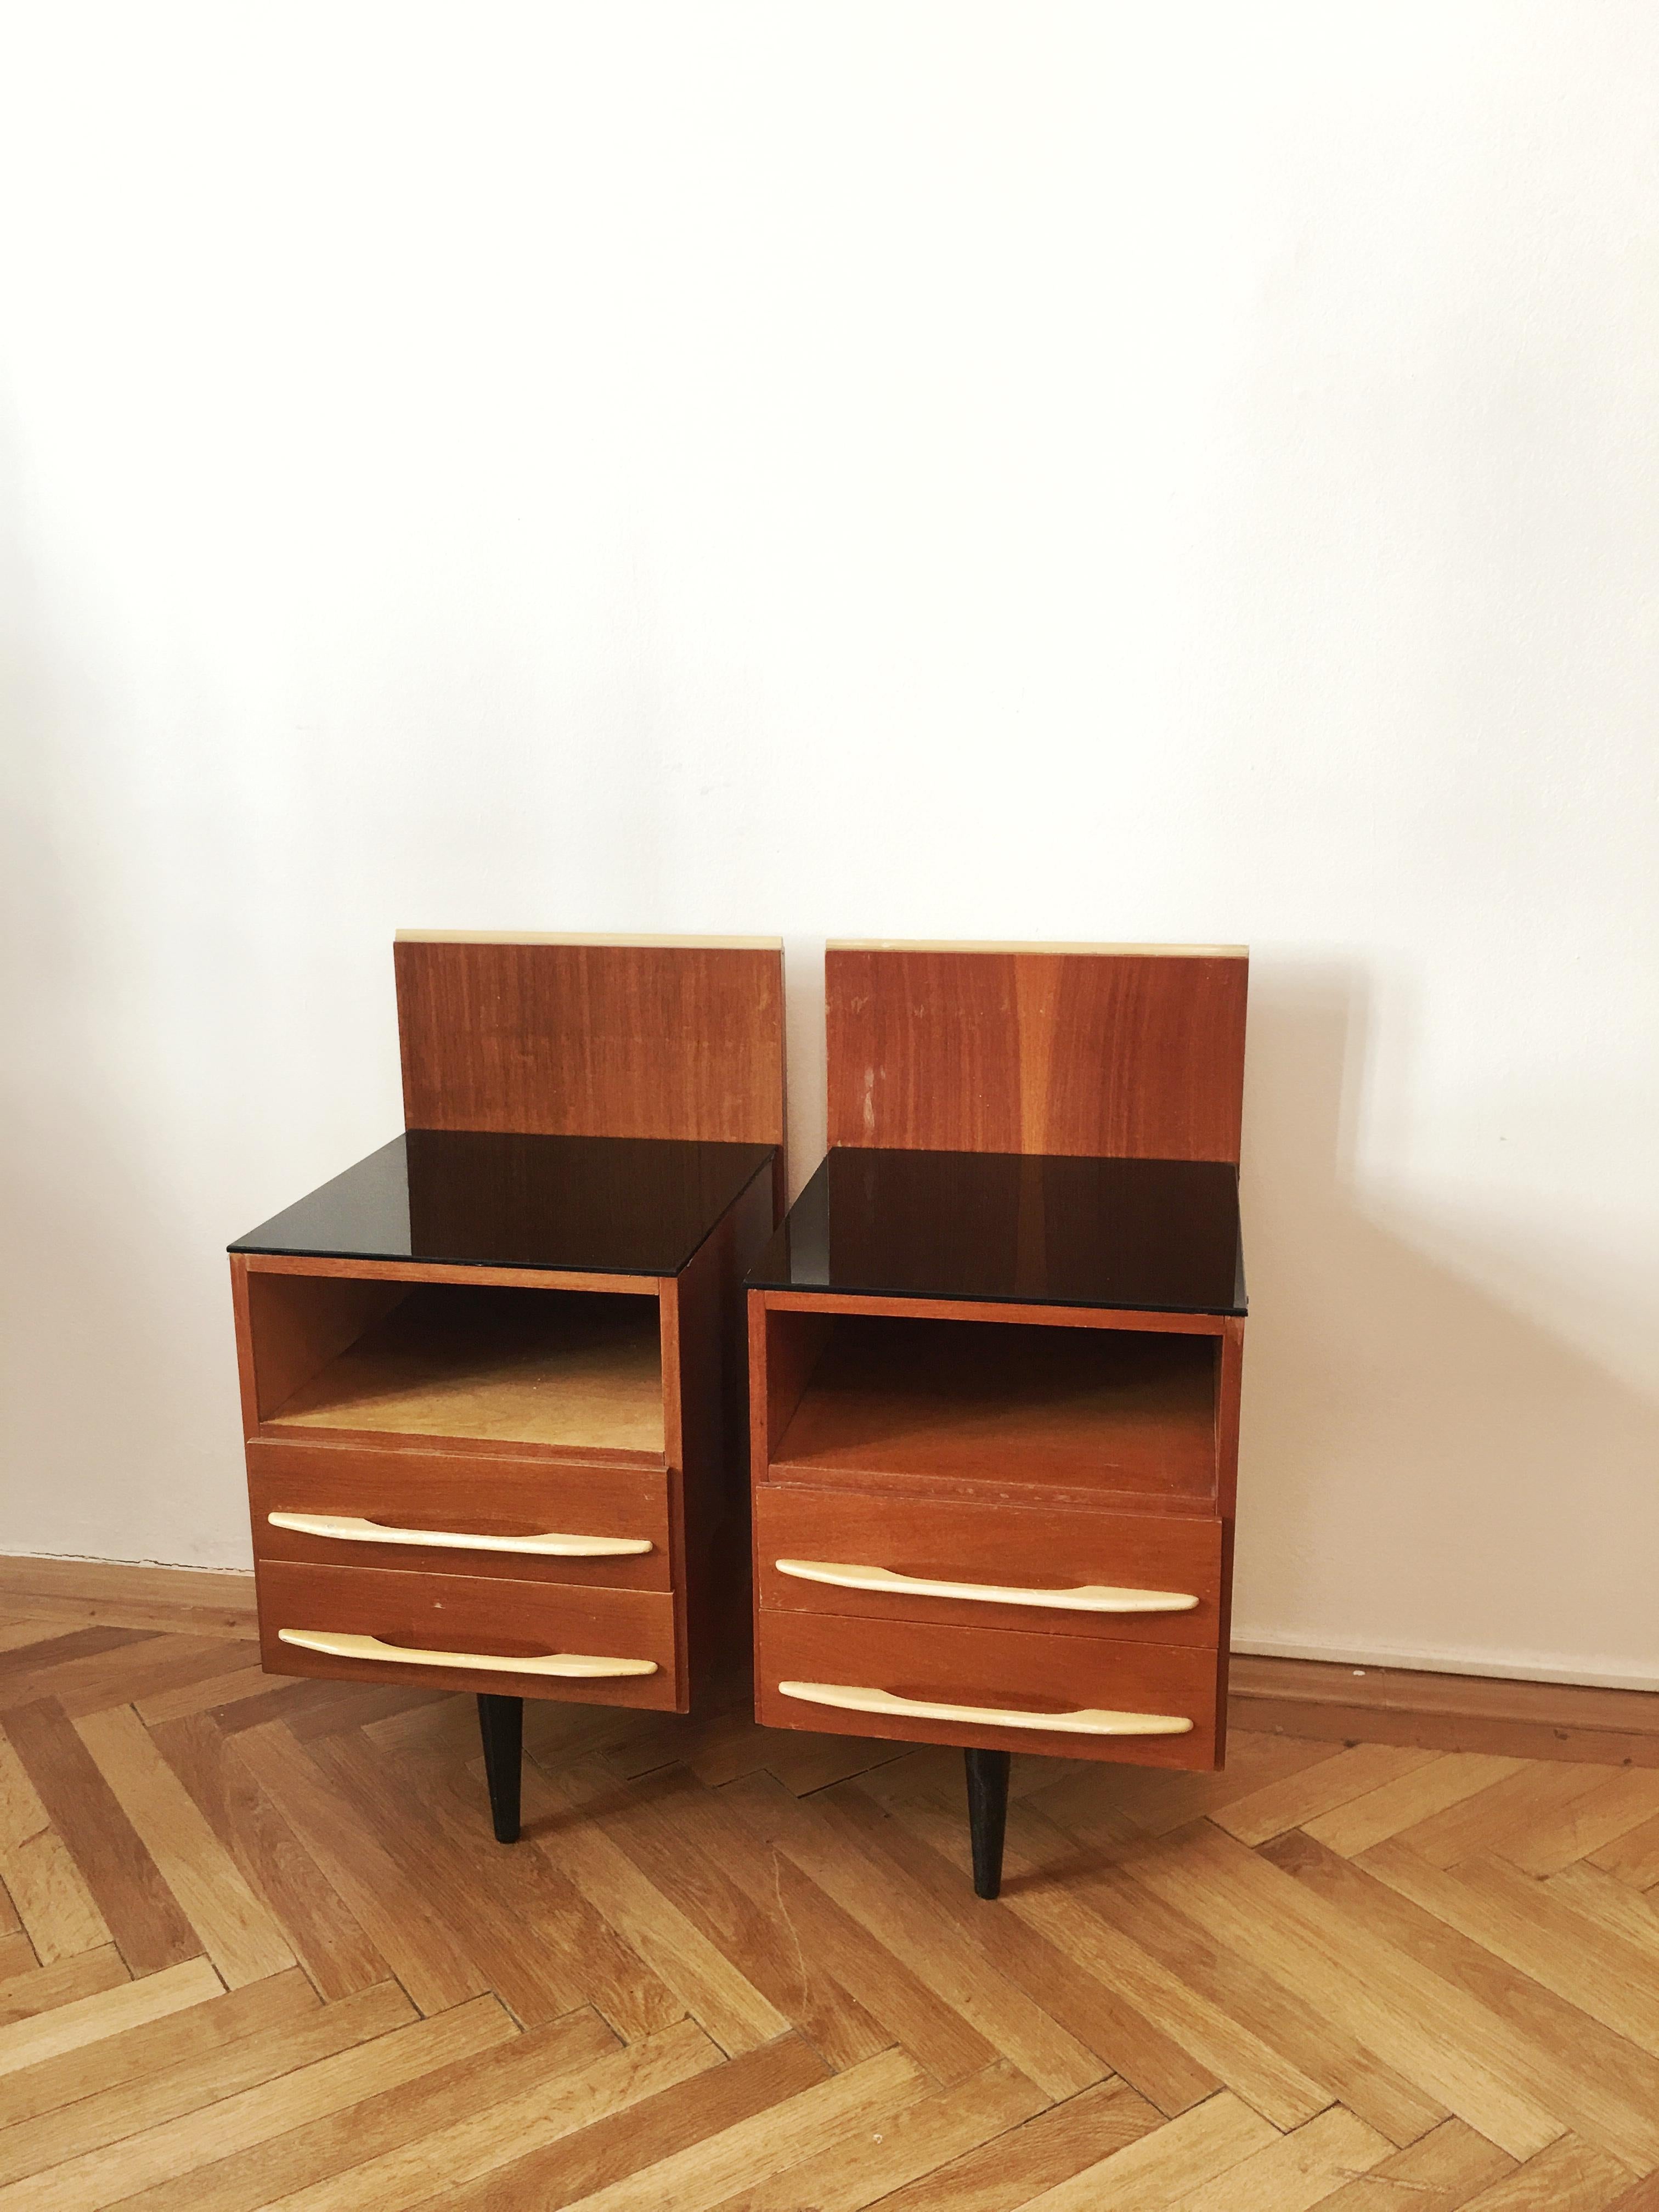 Nightstands by Mojmir Pozar for Up Zavody, 1960s, Pair For Sale 3